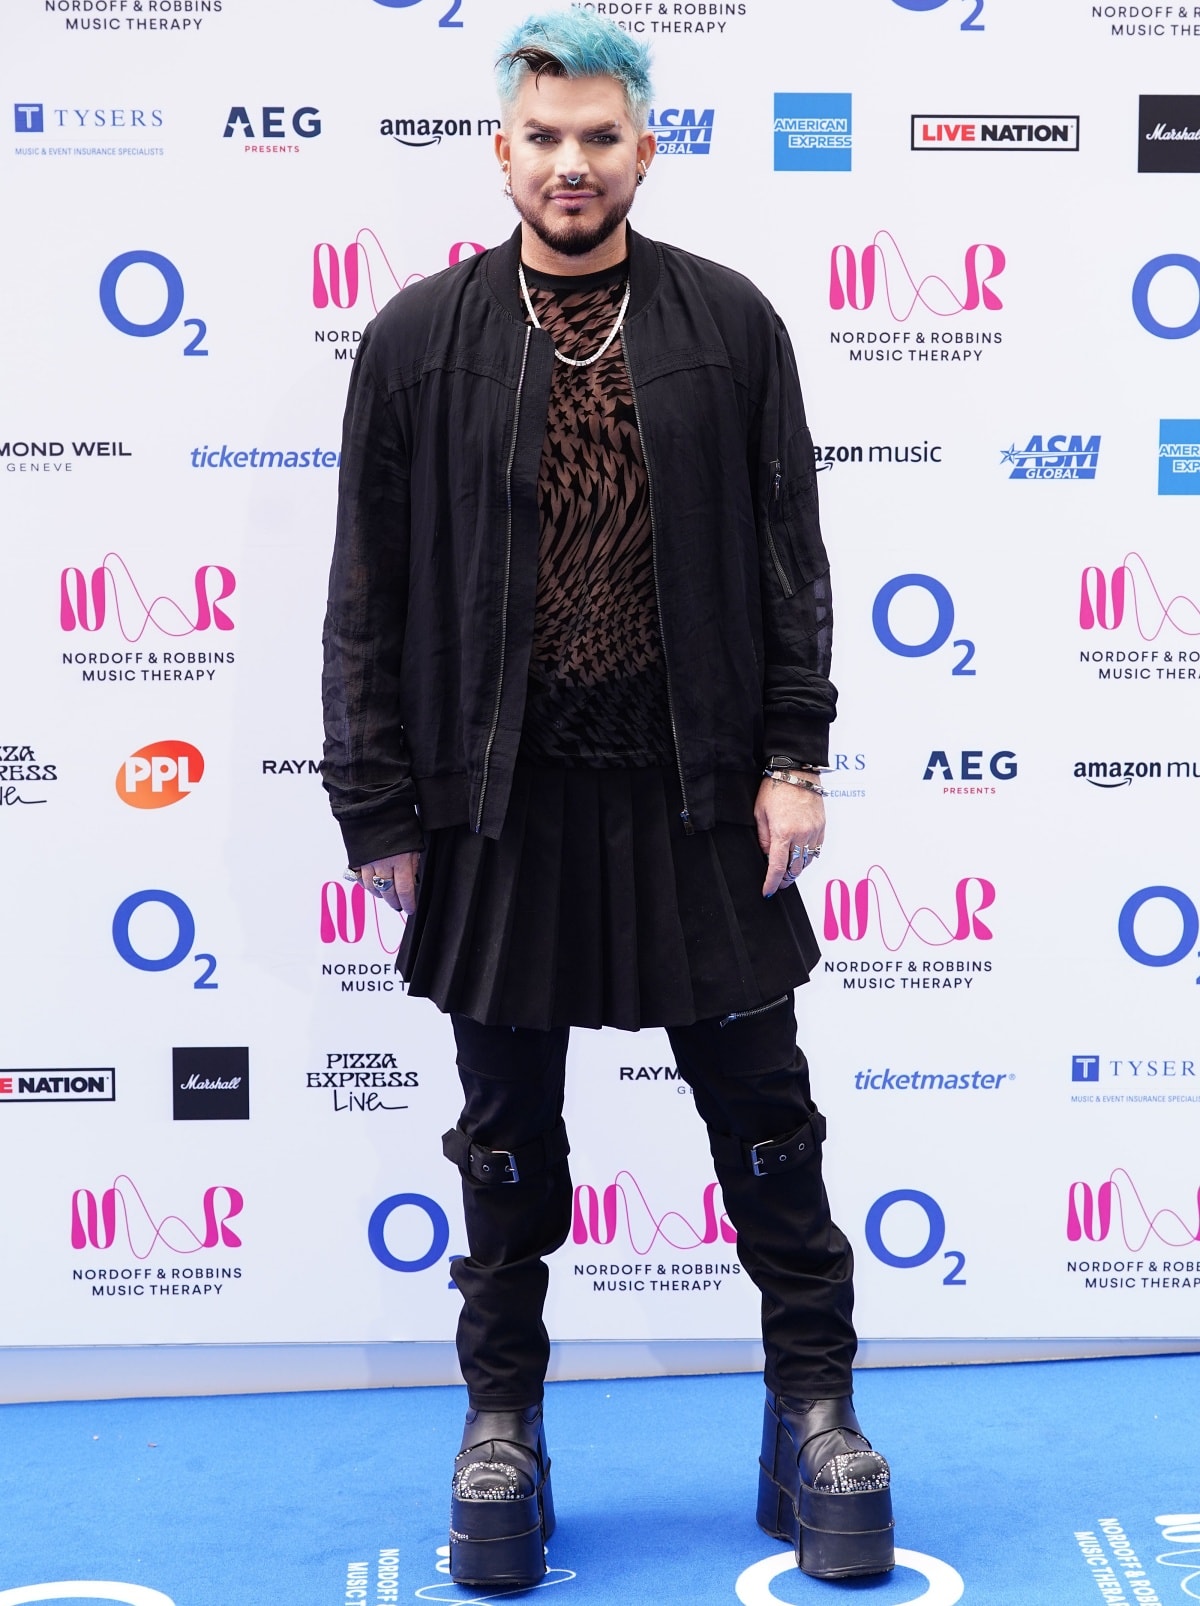 Adam Lambert was a runner-up on the eighth season of American Idol, and he has amassed a net worth of $45 million